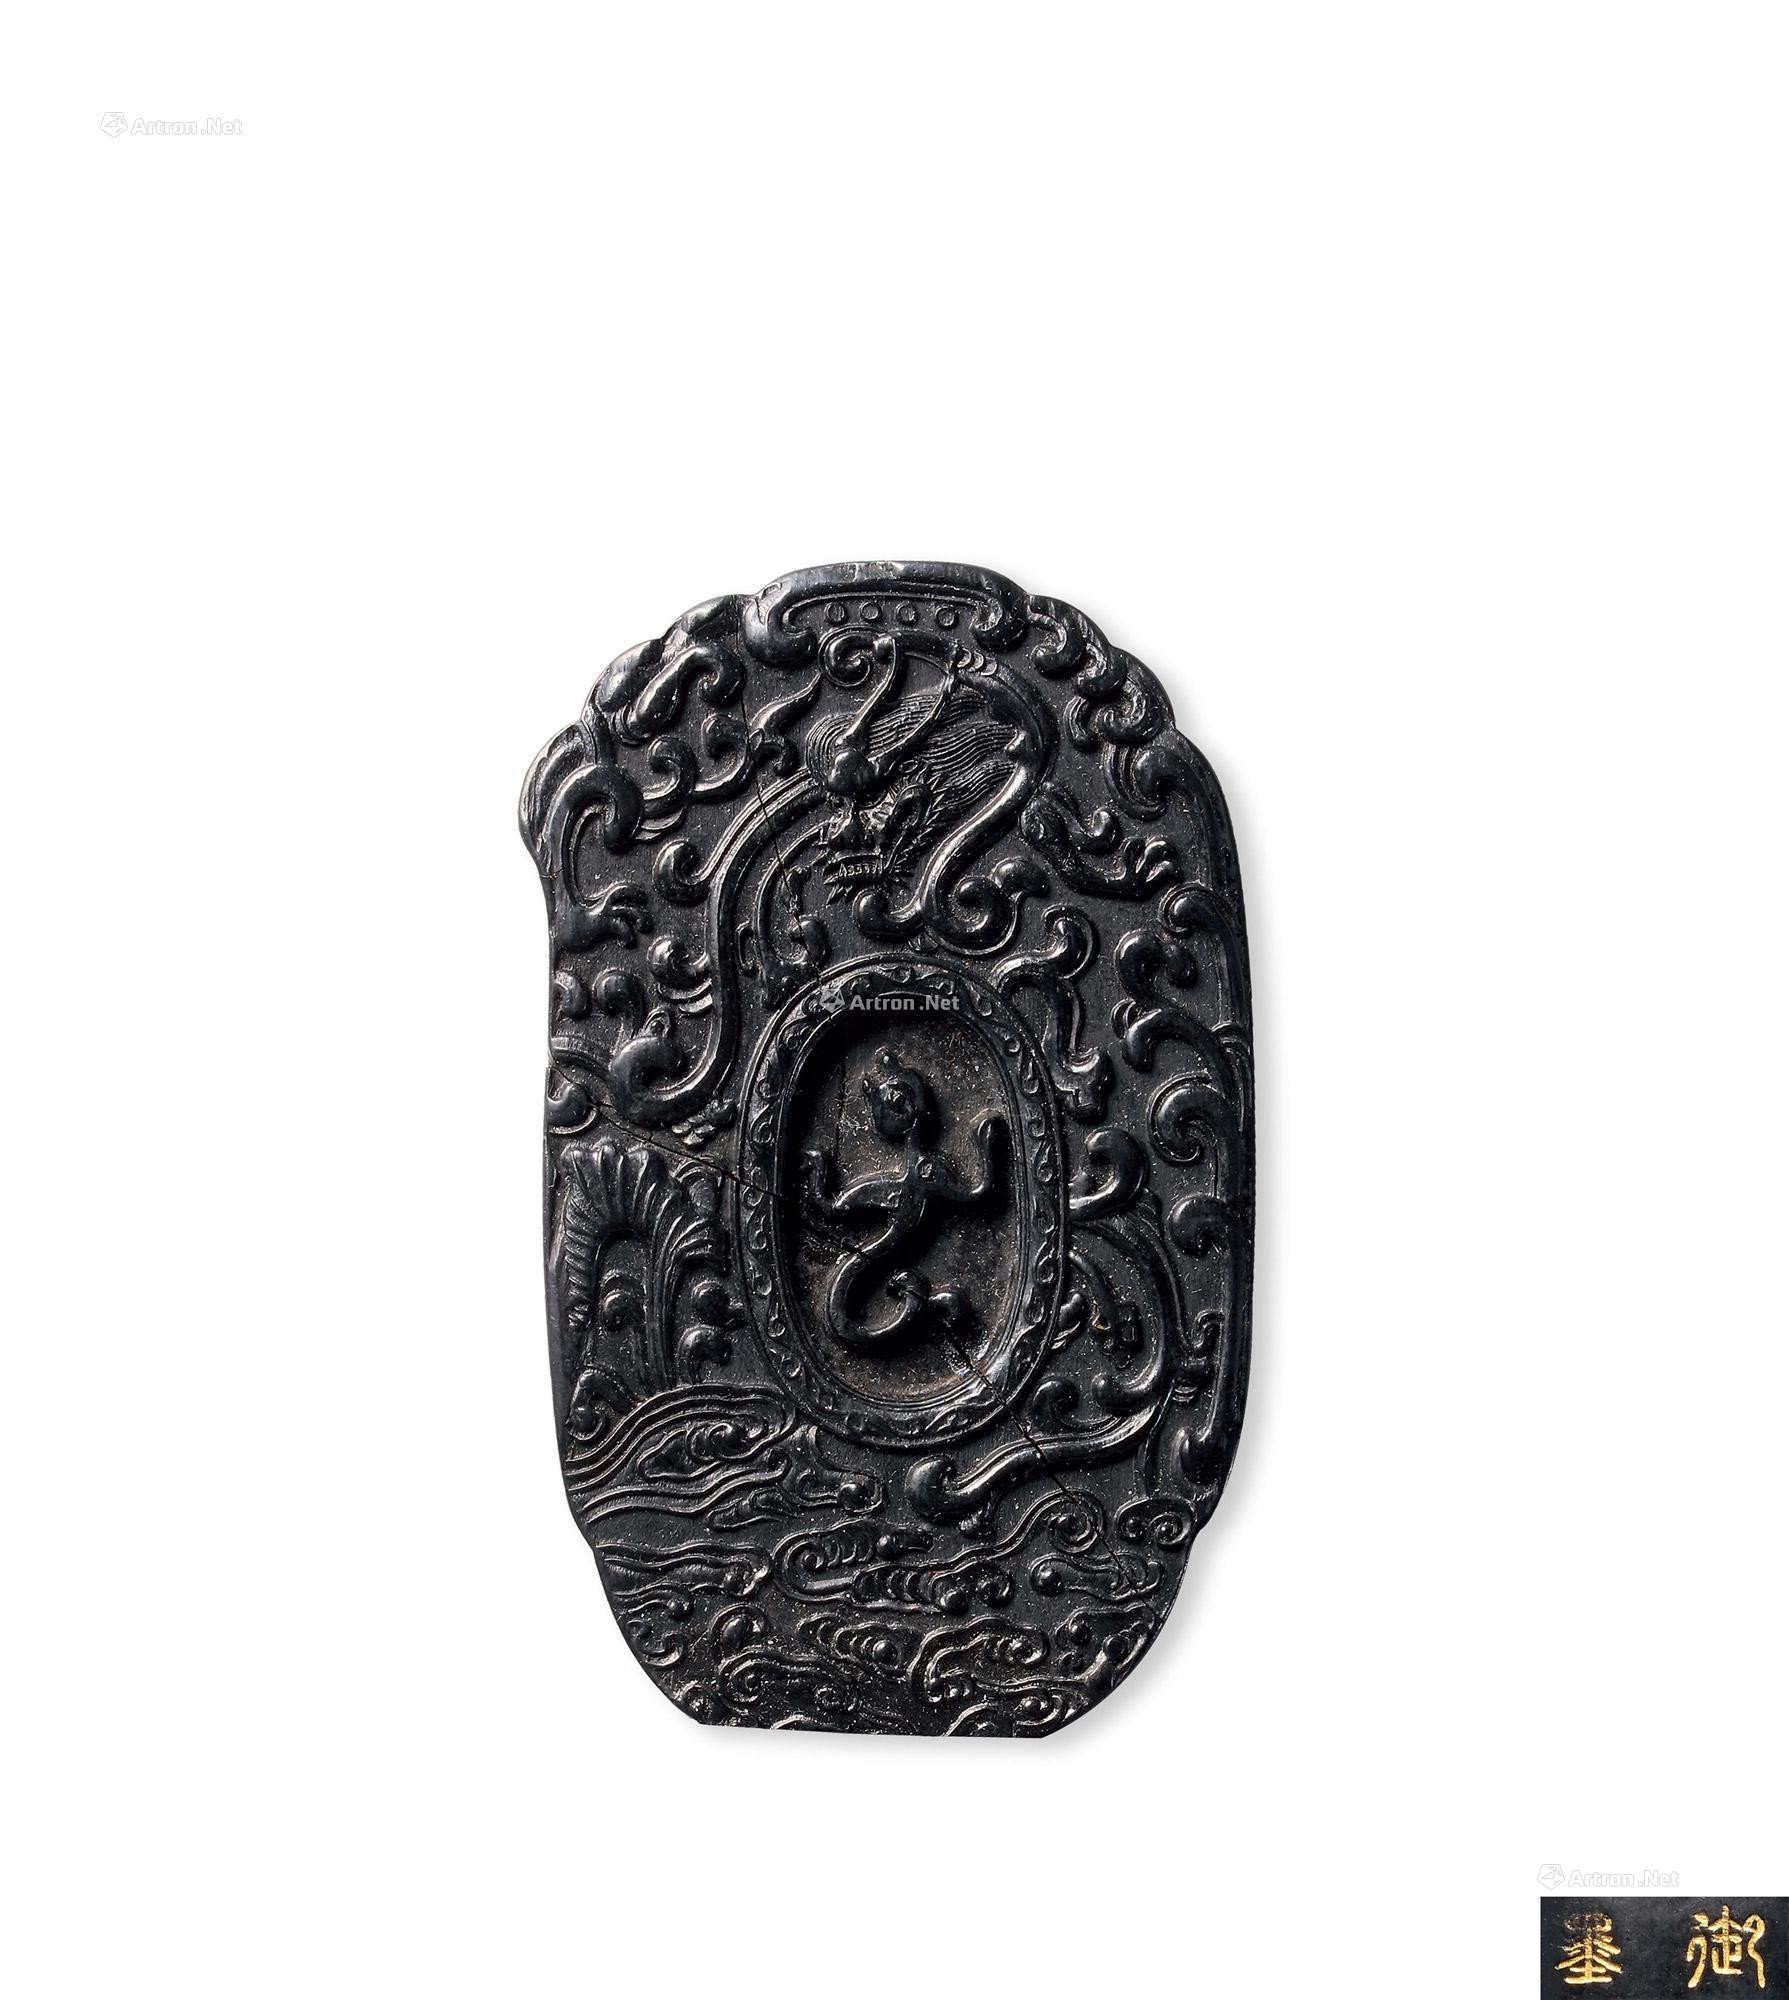 ANCIENT-TYPE INK STICKS WITH DESIGN OF DRAGON